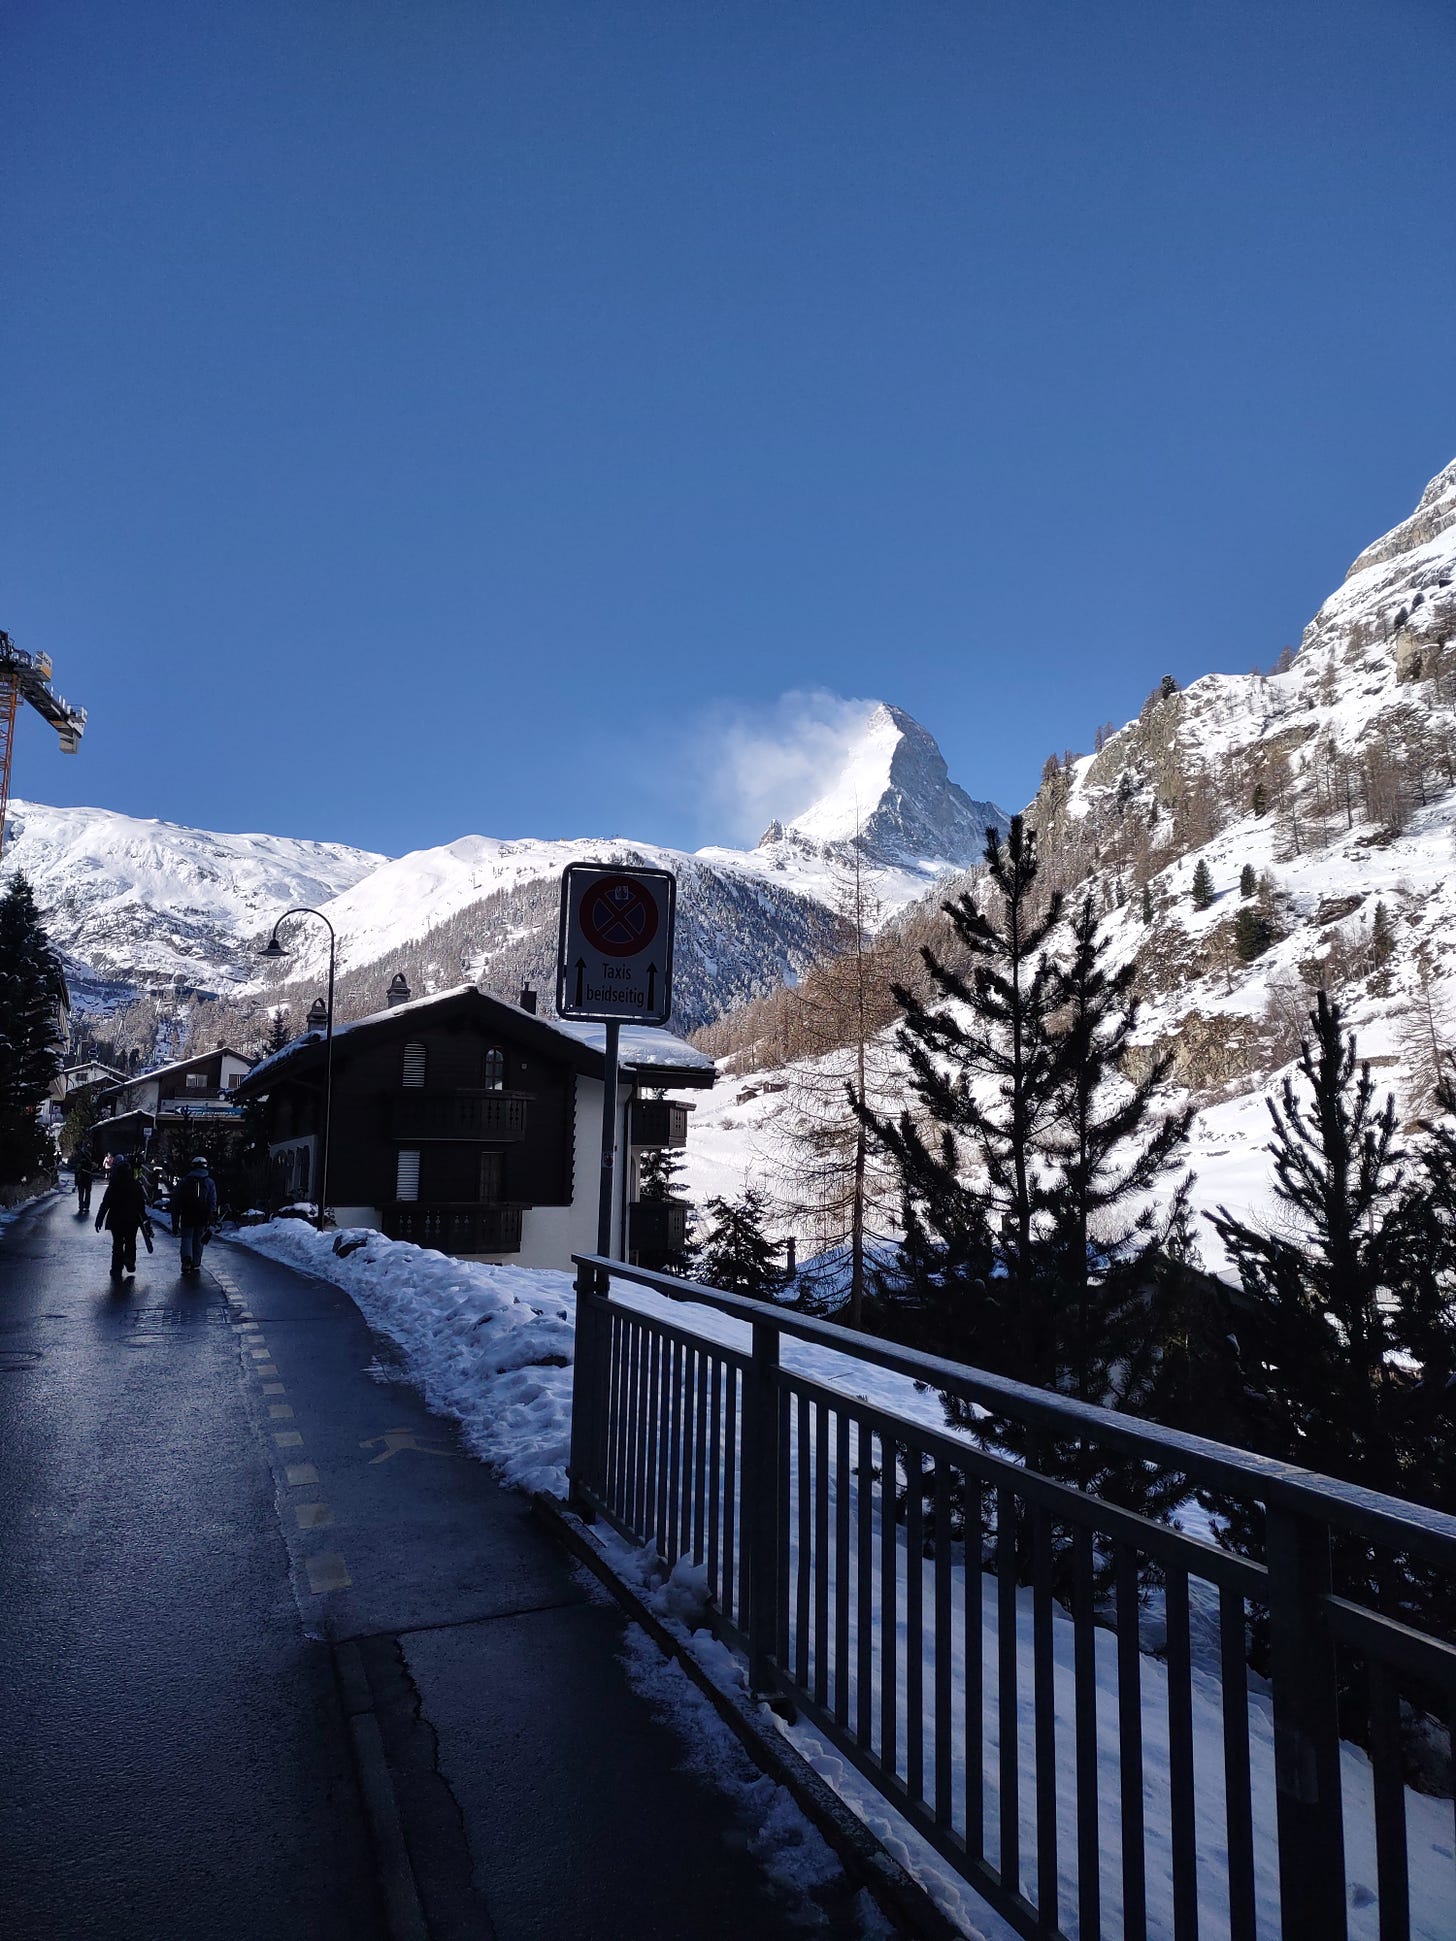 Picture of the matterhorn from Zermatt village. The wind is blowing snow off the left side and the sku is blue.